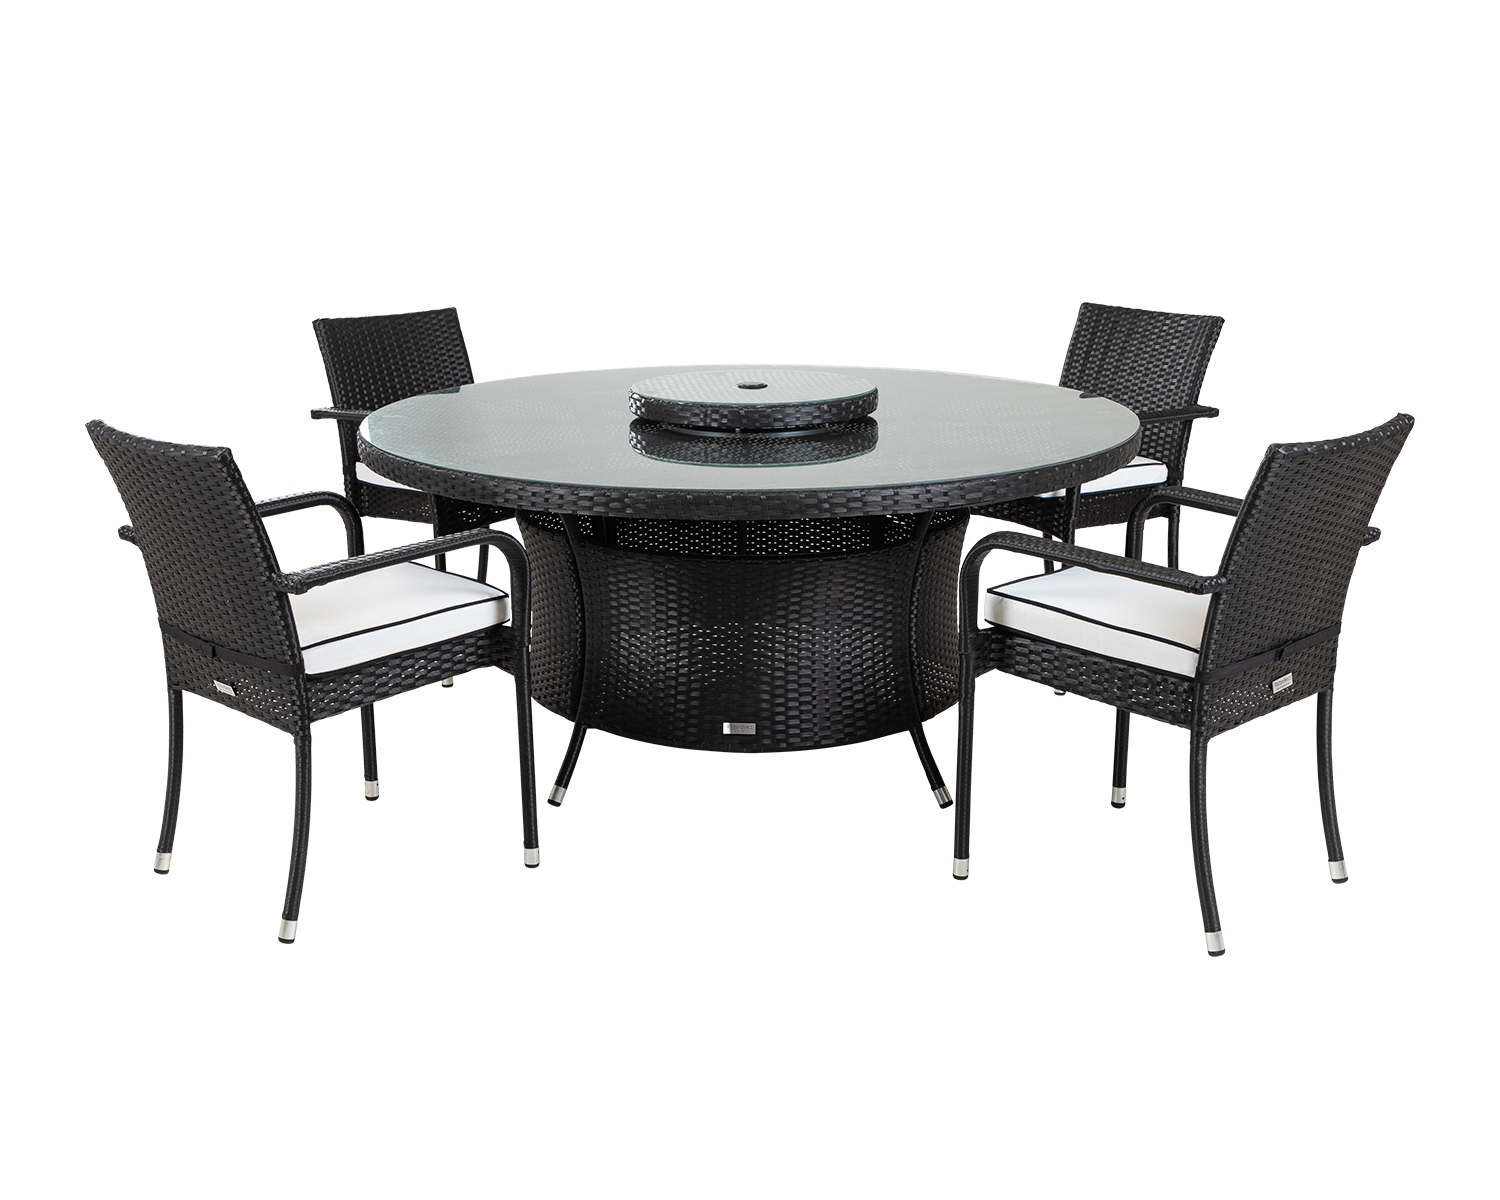 4 Rattan Garden Chairs Large Round Dining Table Amp Lazy Susan Set In Black Amp White Roma Rattan Direct